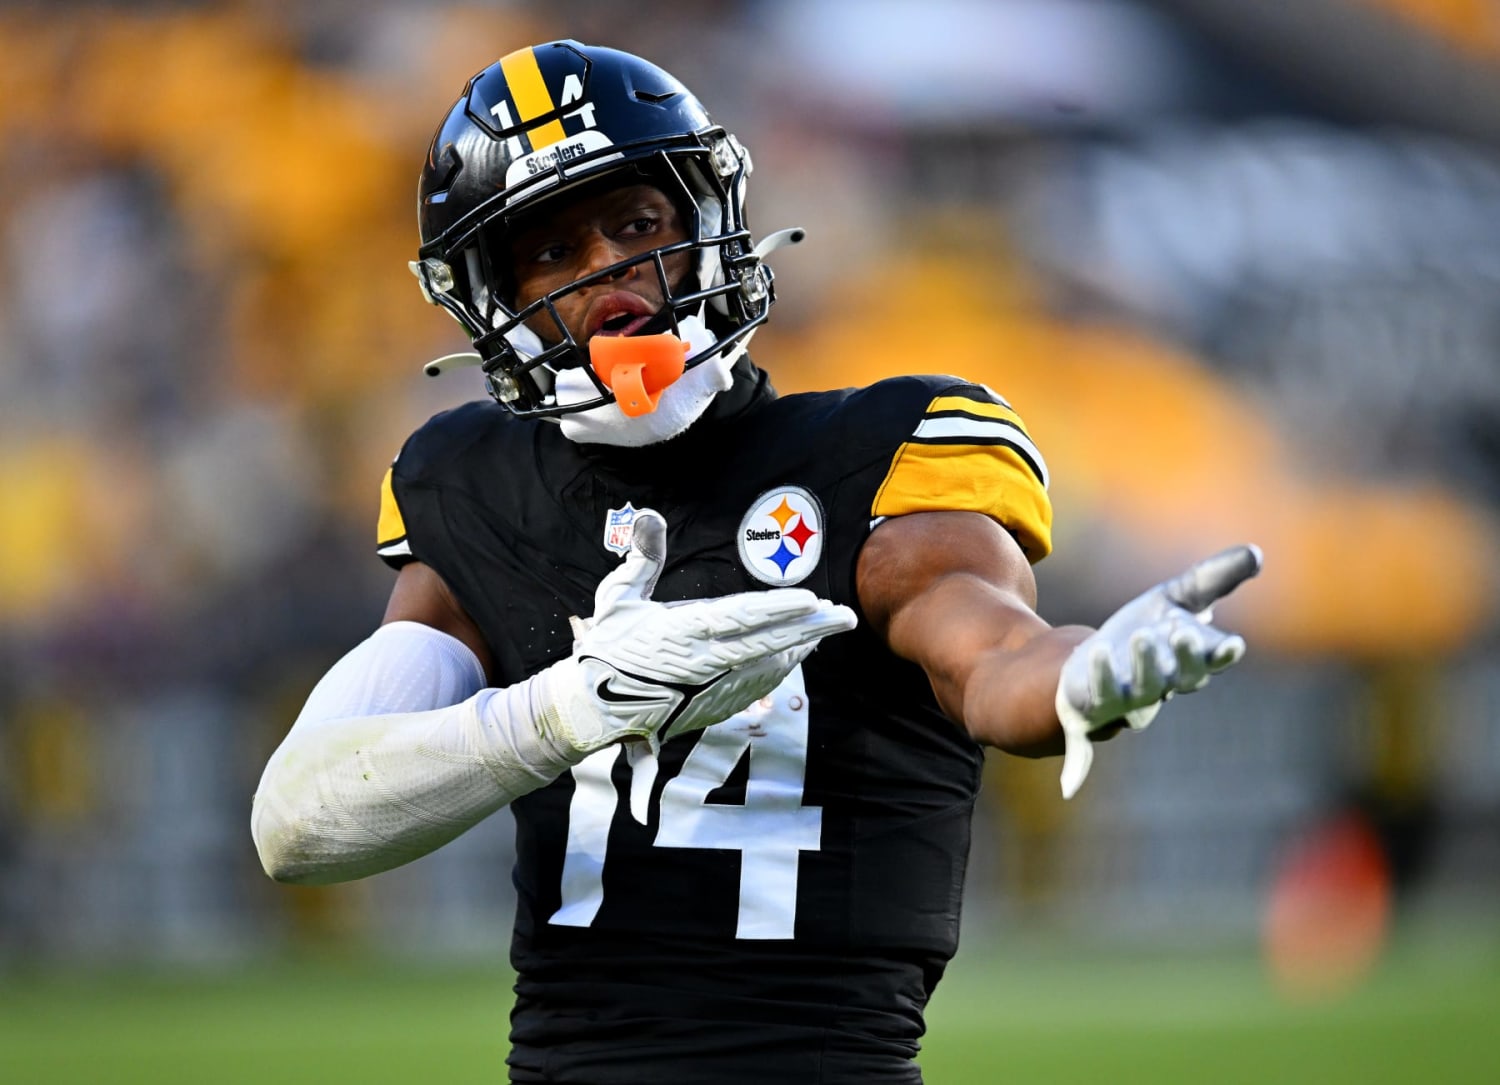 BetUS Pro Football 🏈 on X: #NFL  Our betting insider has the scoop on  Patriots vs. Steelers 🏈 ▪️ 54% on Patriots +5 ▪️ 59% on Steelers ML ▪️ 67%  on